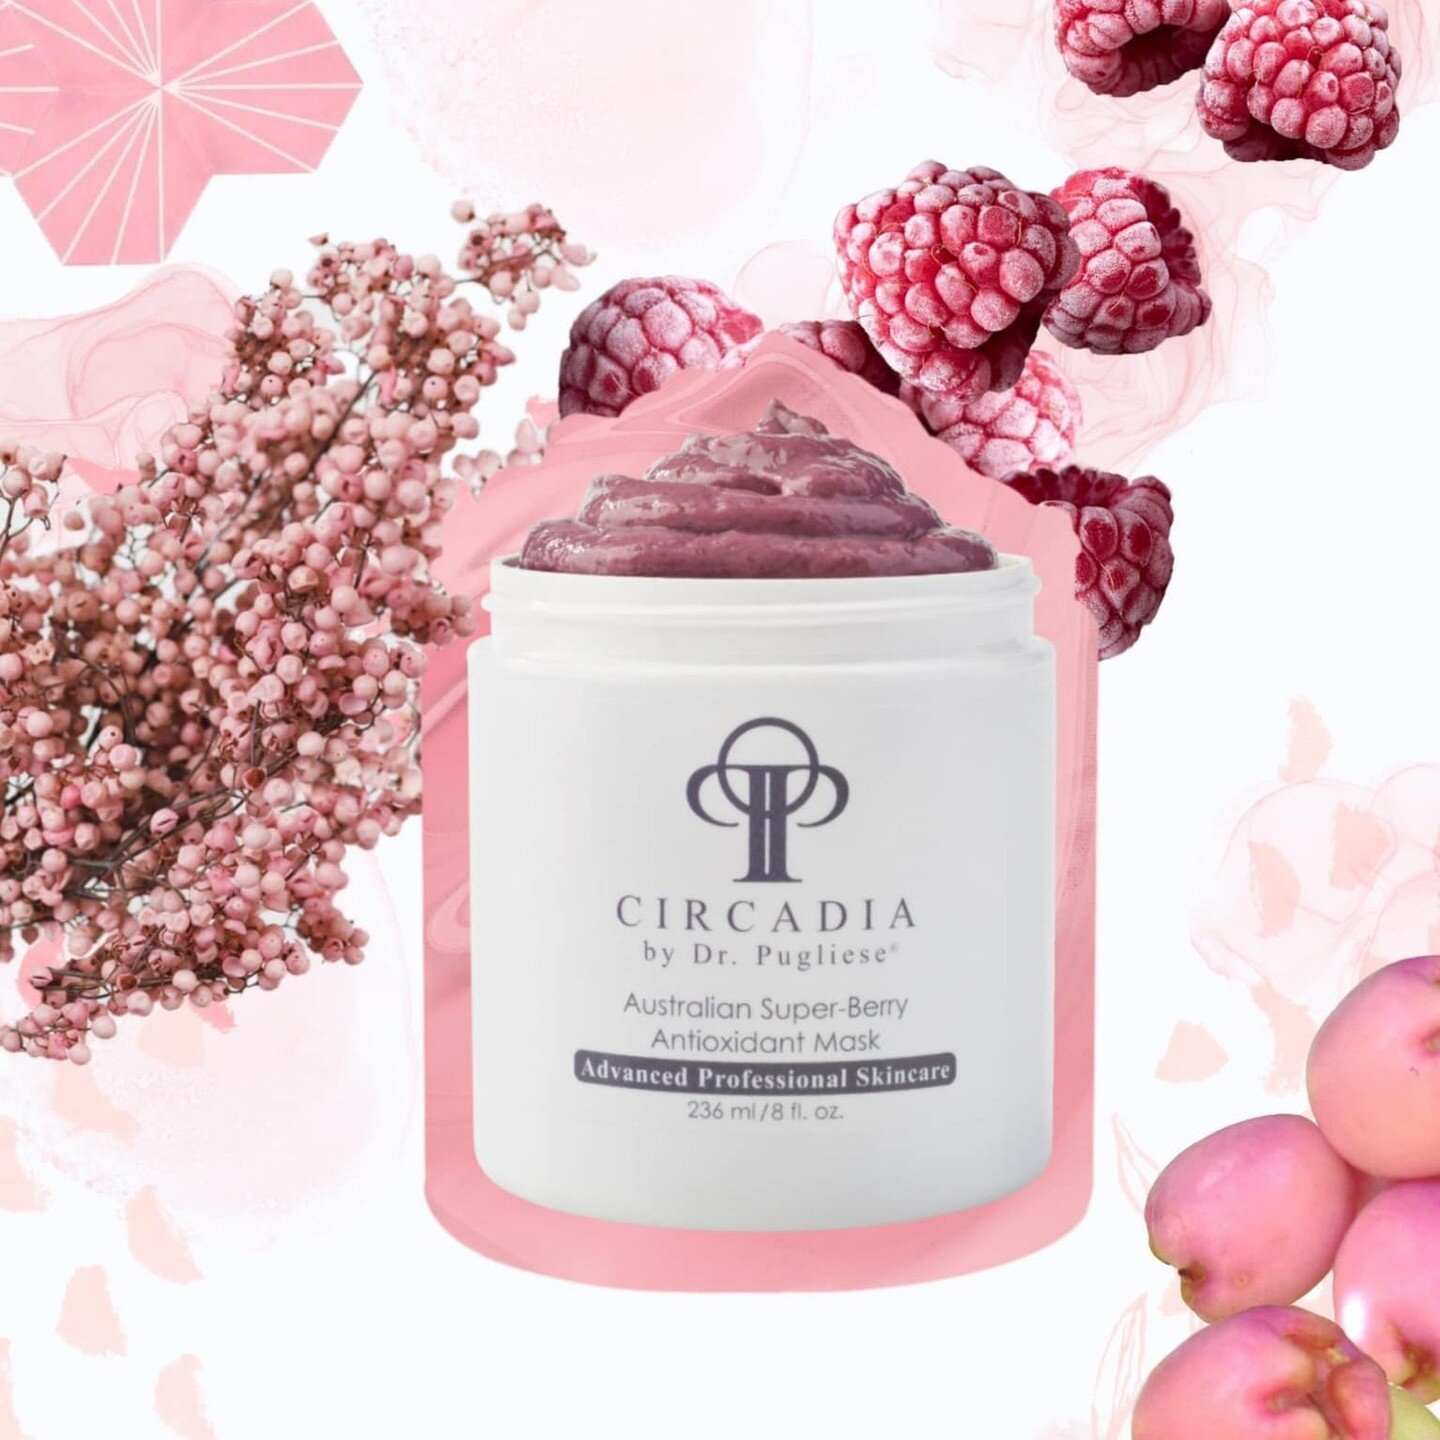 Meet your Spring🌷facial treatment:

Raspberry Enzyme Treatment:
This brightening enzyme contains red raspberry seed extract designed to deliver essential antioxidants and brighten the skin. The gentle exfoliation of natural papaya and pineapple enzy